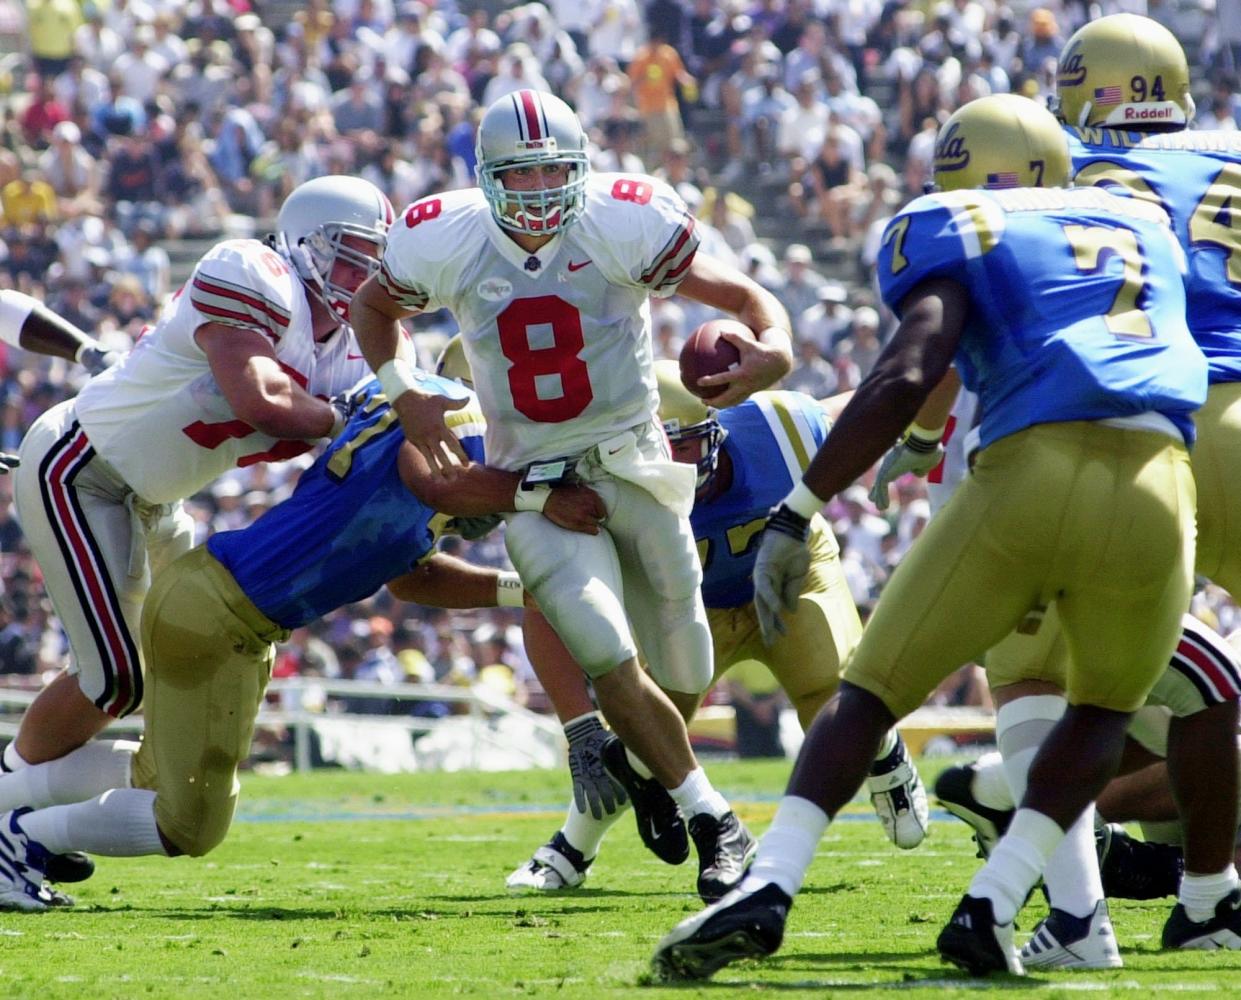 From 1998-2001, Ohio State's Steve Bellisari completed 386 of 759 pass attempts for 5,878 yards, 35 touchdowns and 29 interceptions.